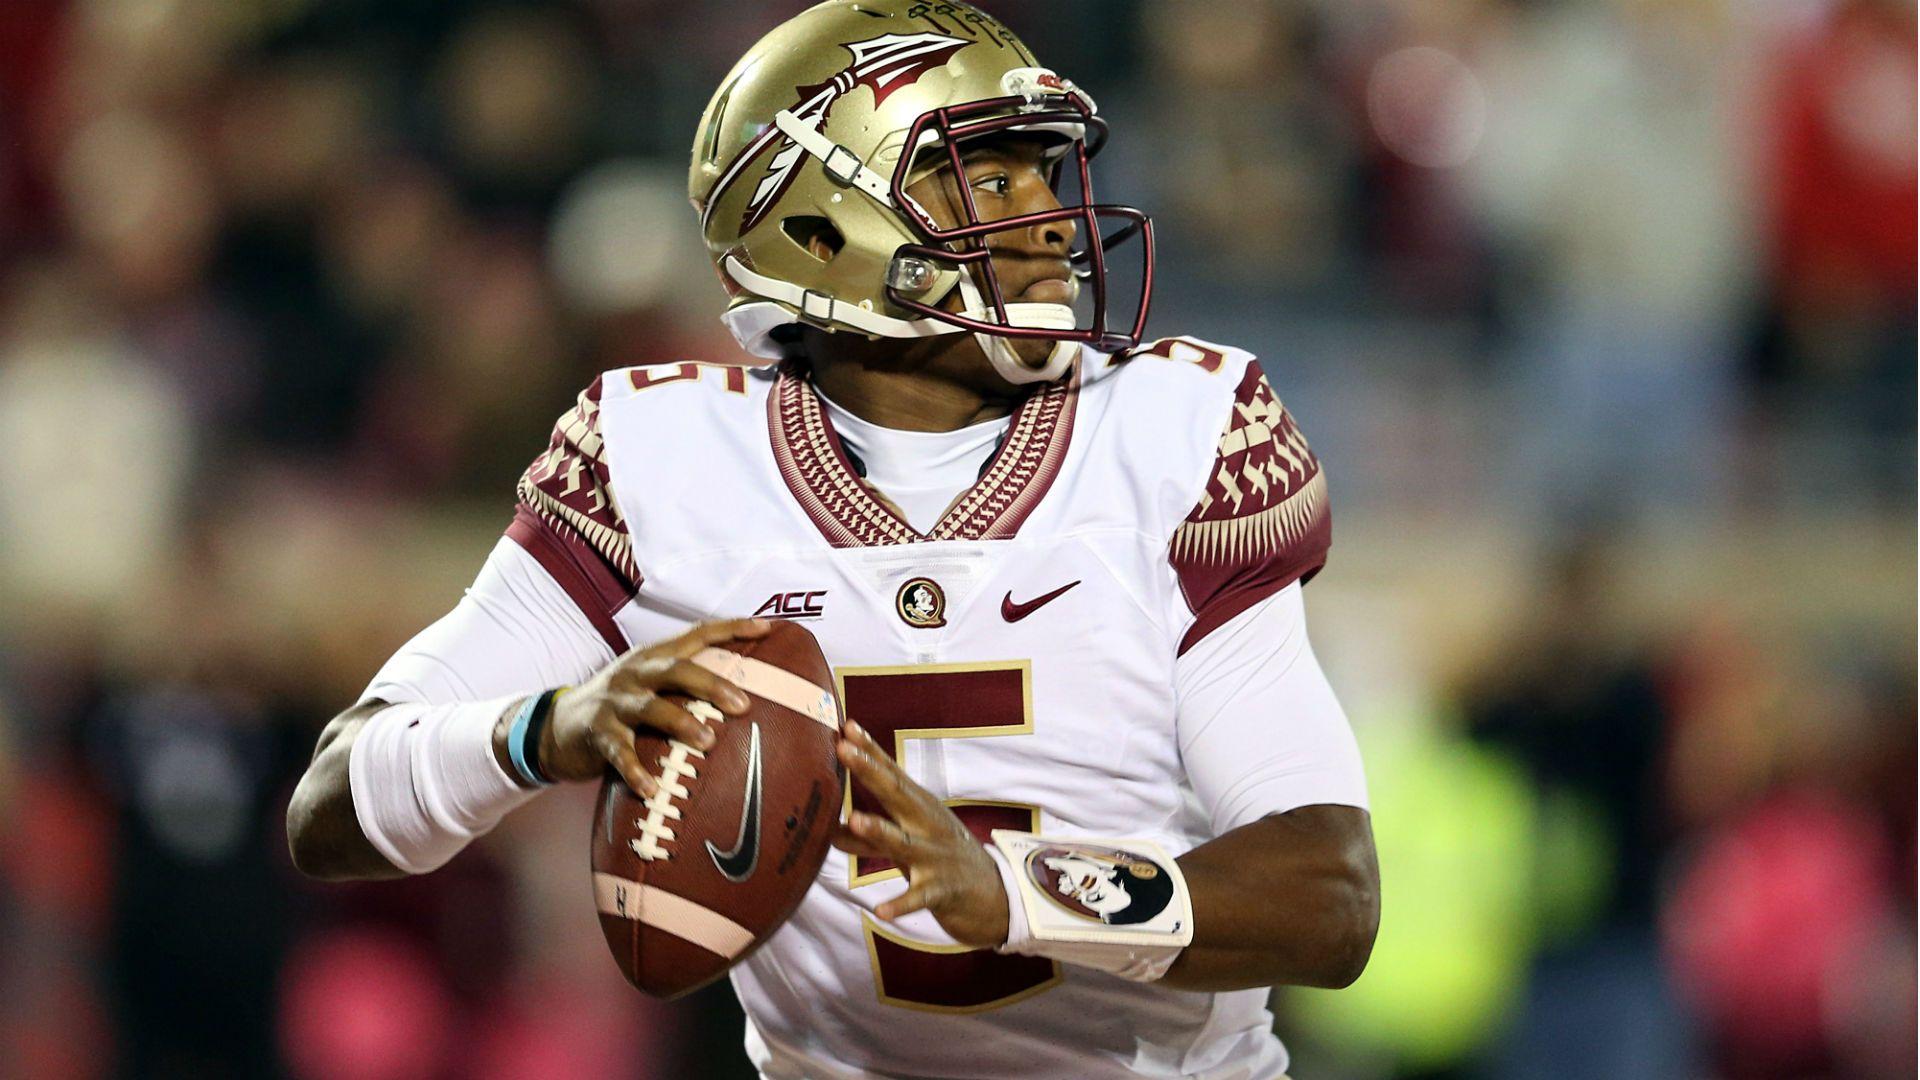 Coach says Jameis Winston might not throw at combine. NFL